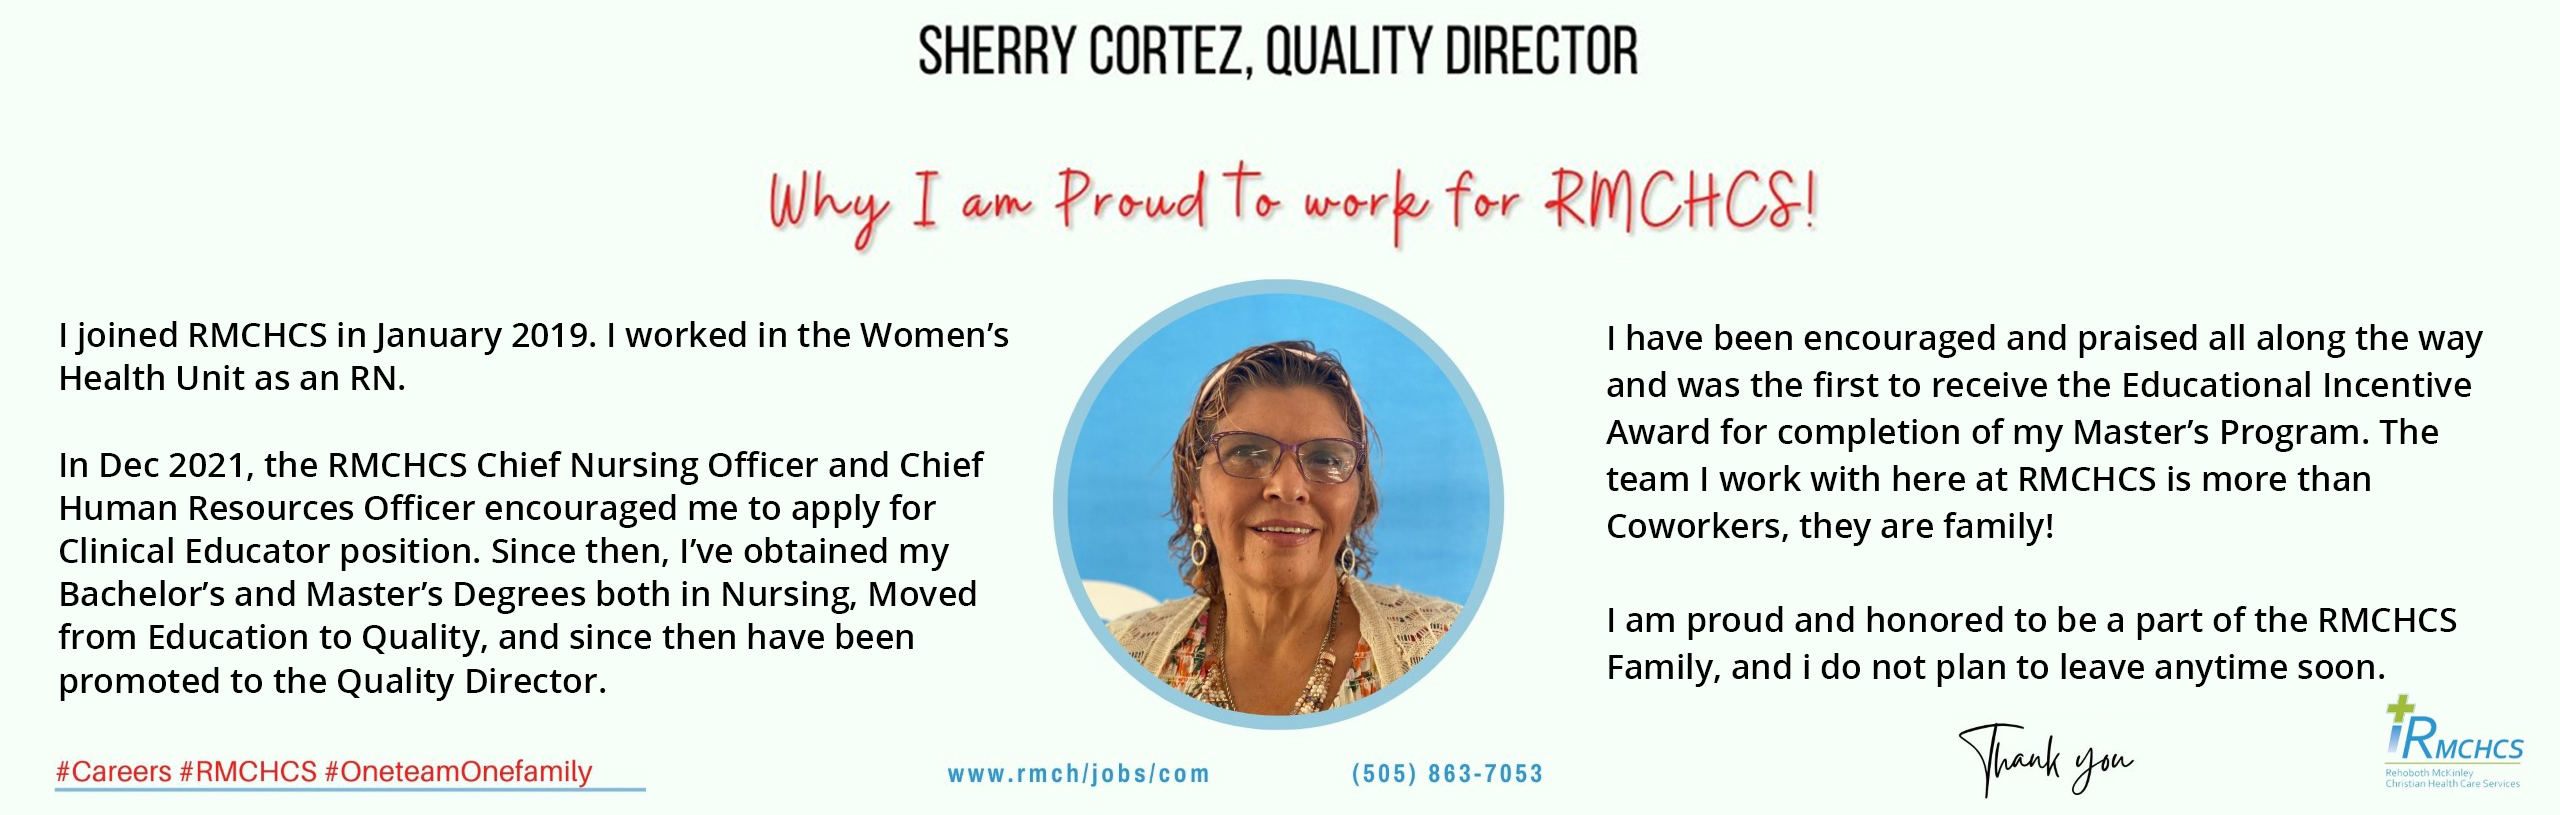 I joined RMCHCS in January 2019. I worked in the Women’s
Health Unit as an RN.

In Dec 2021, the RMCHCS Chief Nursing Officer and Chief
Human Resources Officer encouraged me to apply for 
Clinical Educator position. Since then, I’ve obtained my 
Bachelor’s and Master’s Degrees both in Nursing, Moved
from Education to Quality, and since then have been
promoted to the Quality Director. 

I have been encouraged and praised all along the way
and was the first to receive the Educational Incentive
Award for completion of my Master’s Program. The
team I work with here at RMCHCS is more than 
Coworkers, they are family!

I am proud and honored to be a part of the RMCHCS 
Family, and i do not plan to leave anytime soon.